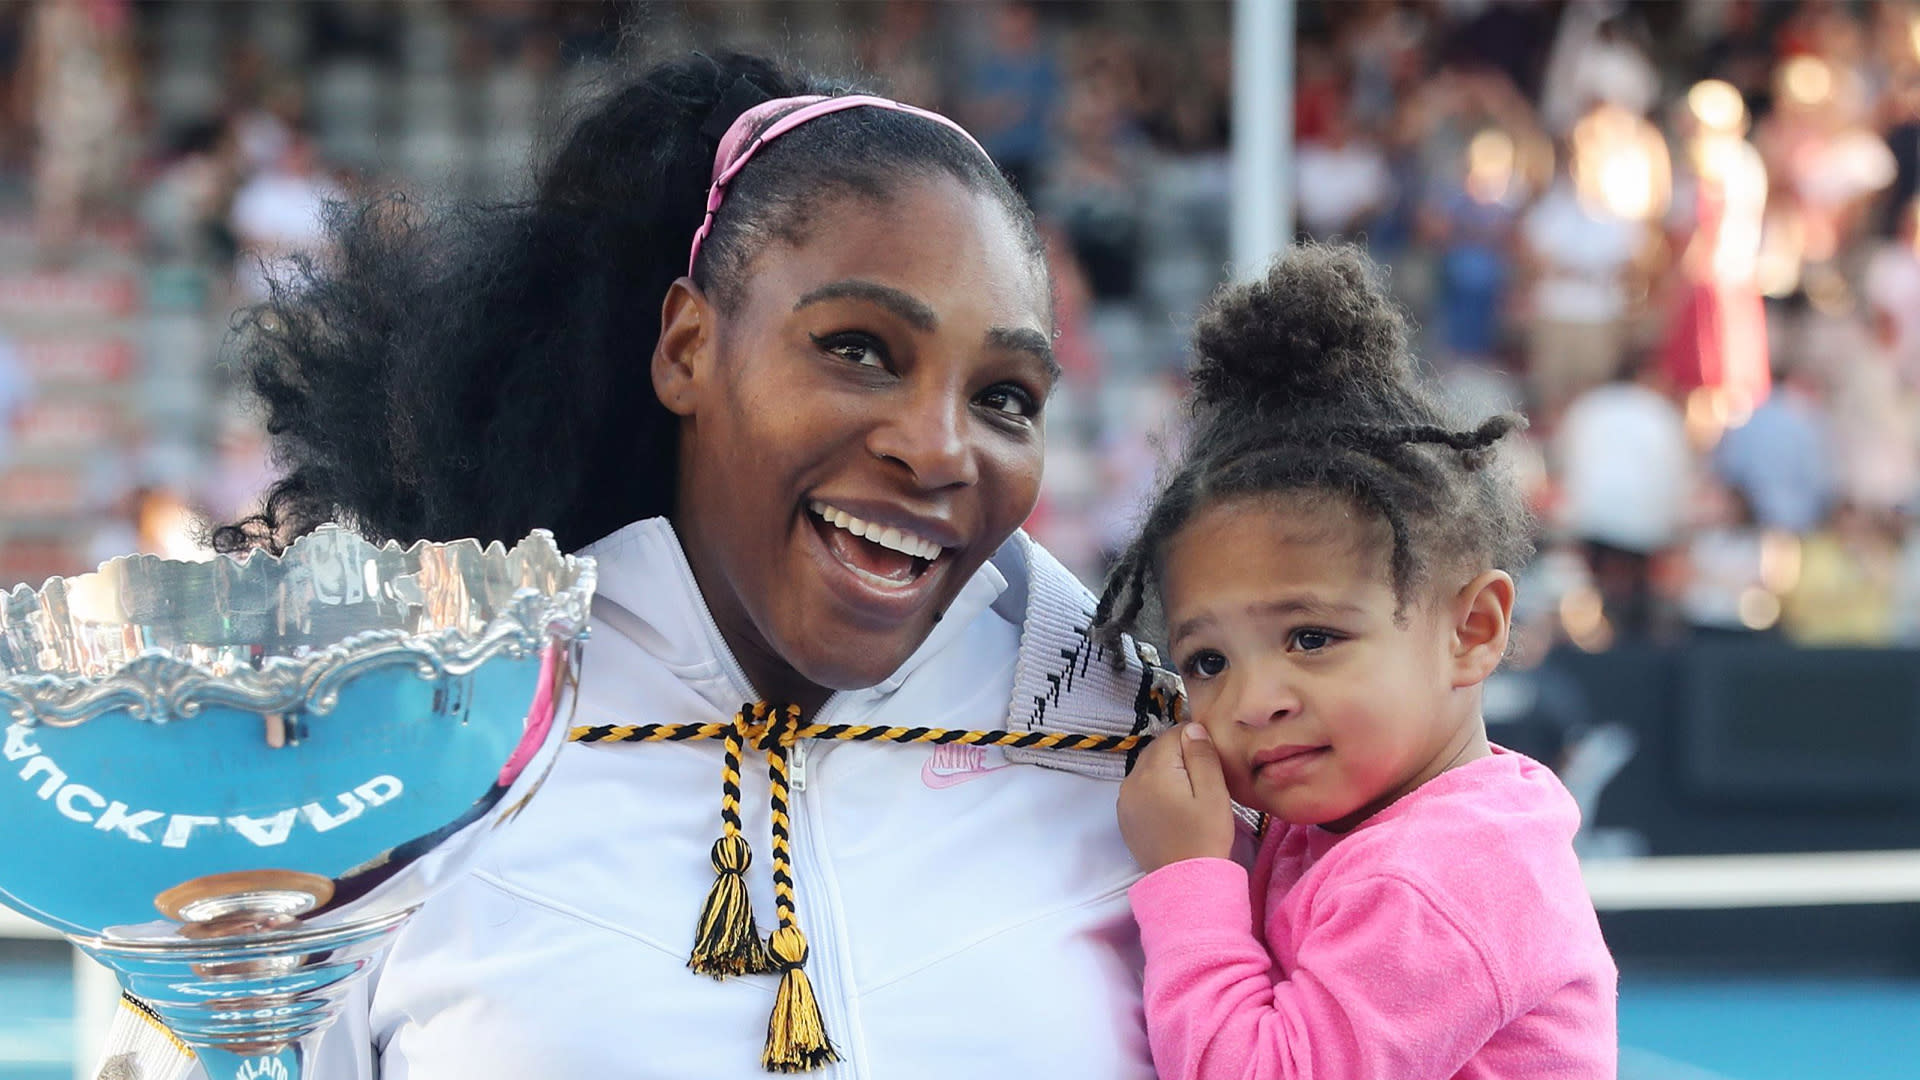 Serena Williams Admits Daughter Olympia Doesn't Like Playing Tennis